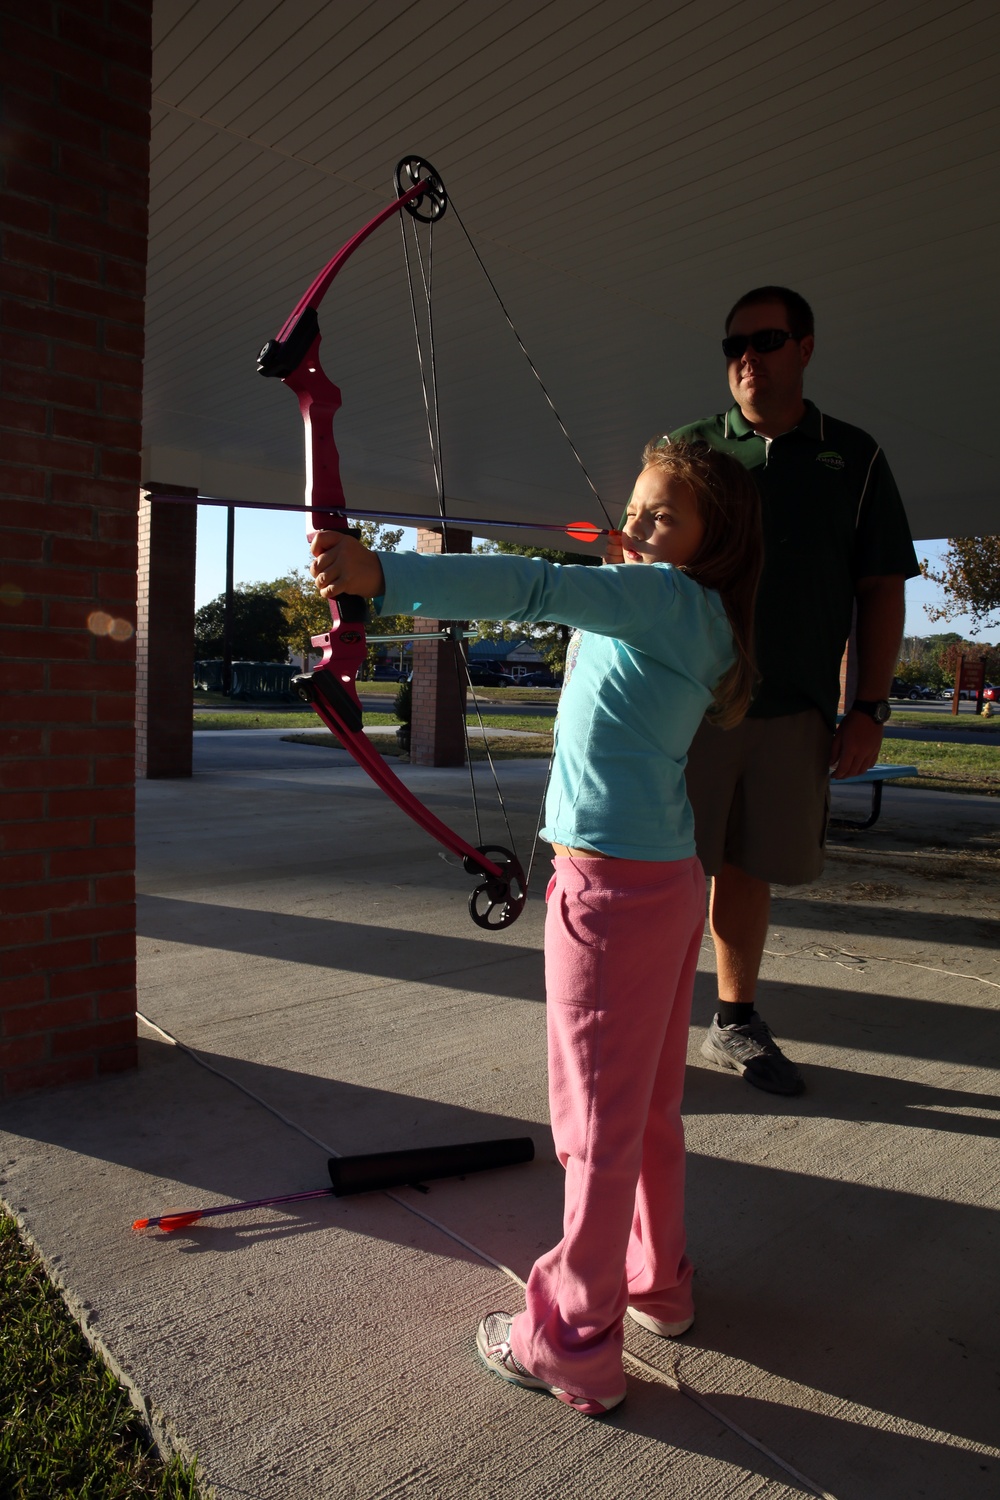 Dvids - Images - Military Children Learn Archery Fundamentals [Image 6 Of 8]